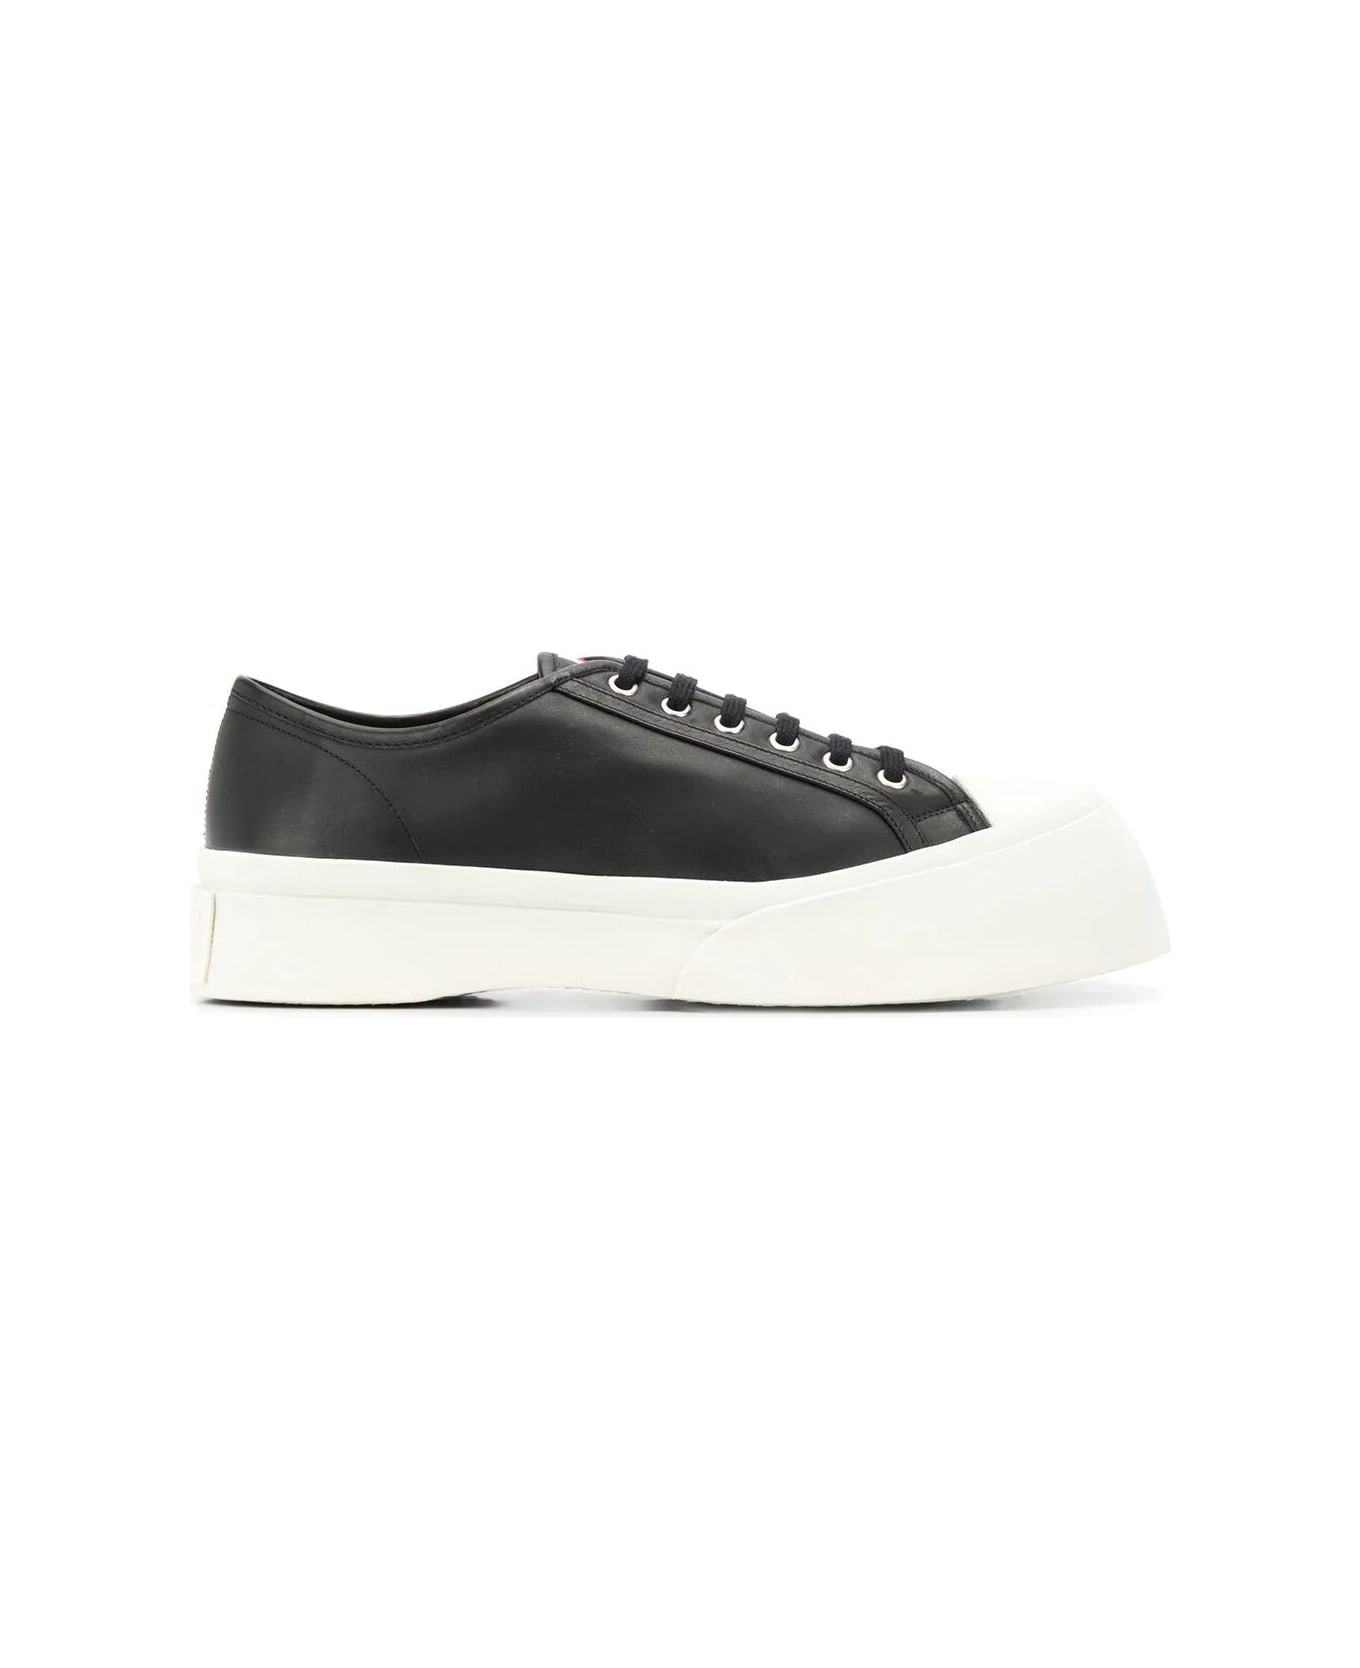 Marni Lace Up Sneakers - Black スニーカー